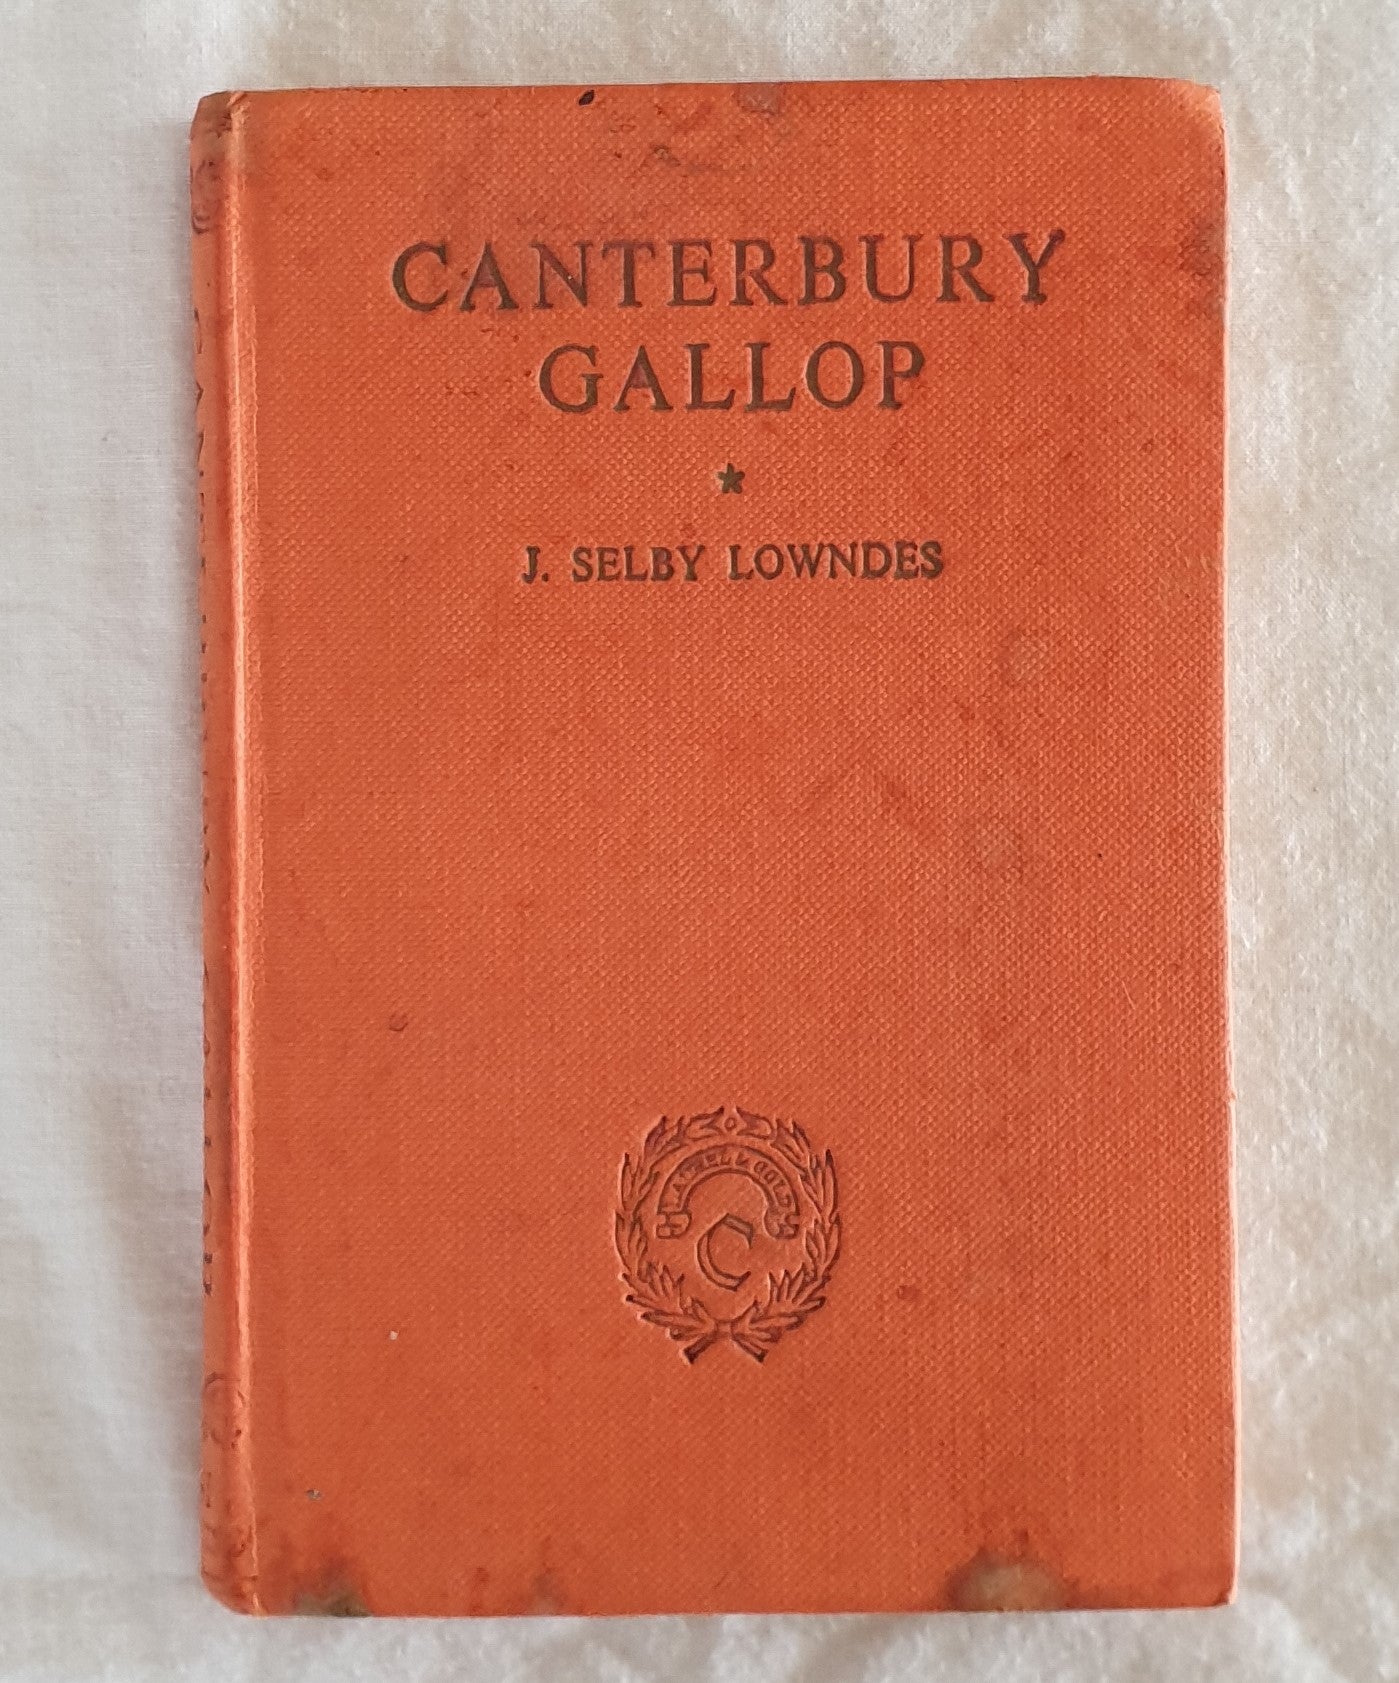 Canterbury Gallop  by J. Selby Lowndes